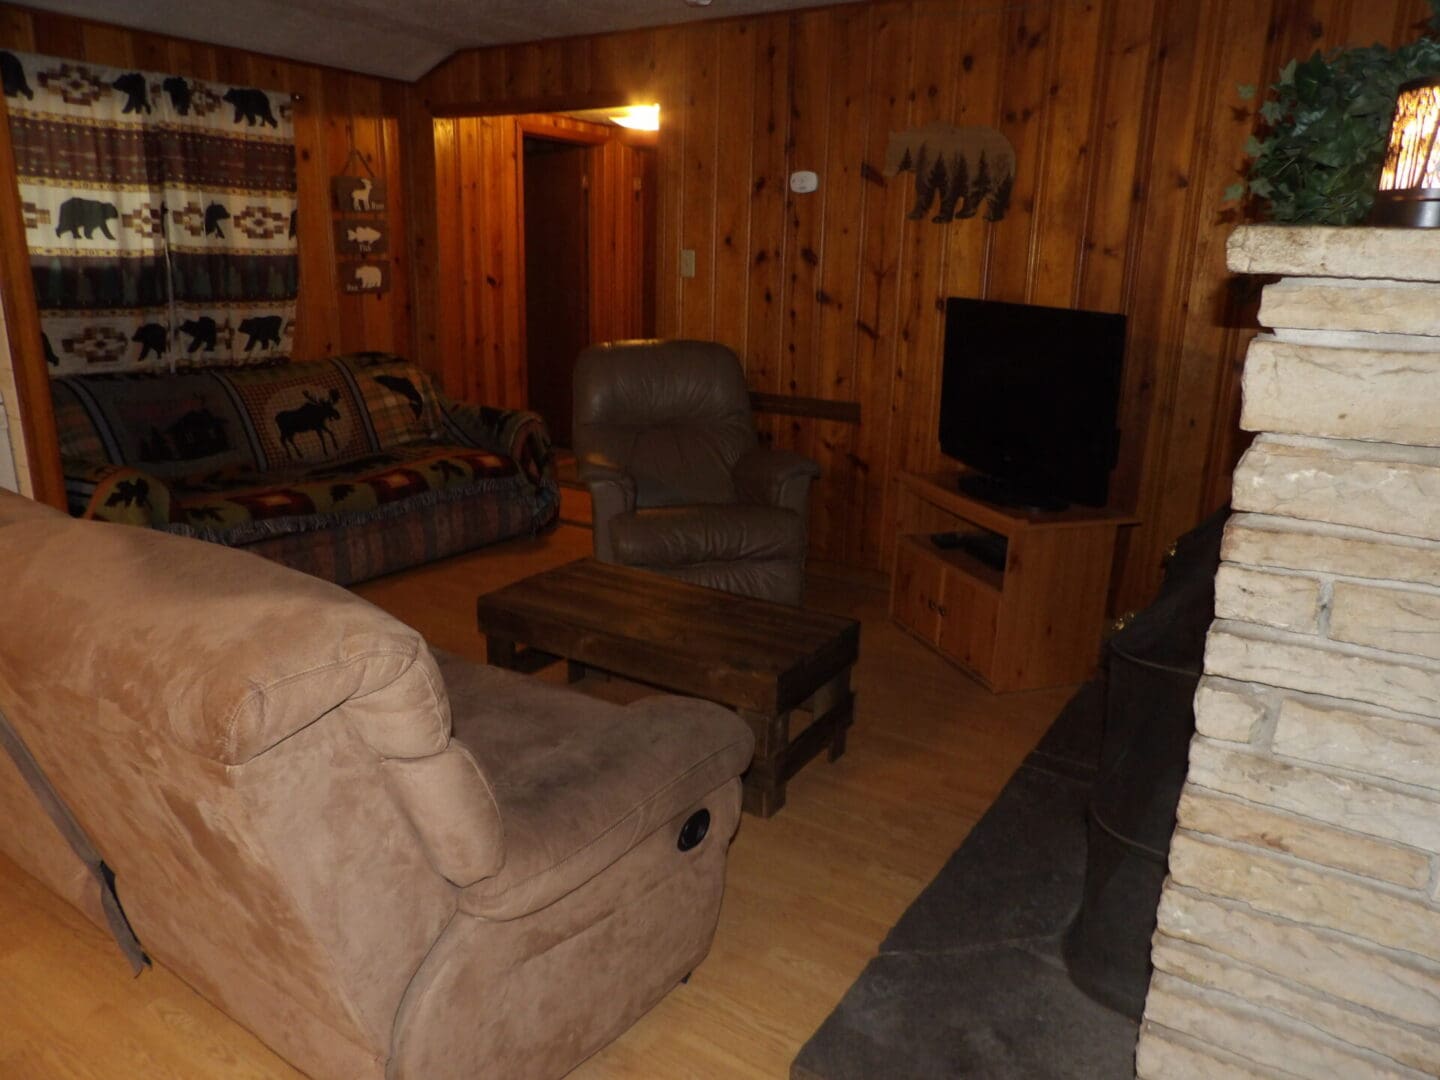 A living room with wood paneled walls and furniture.